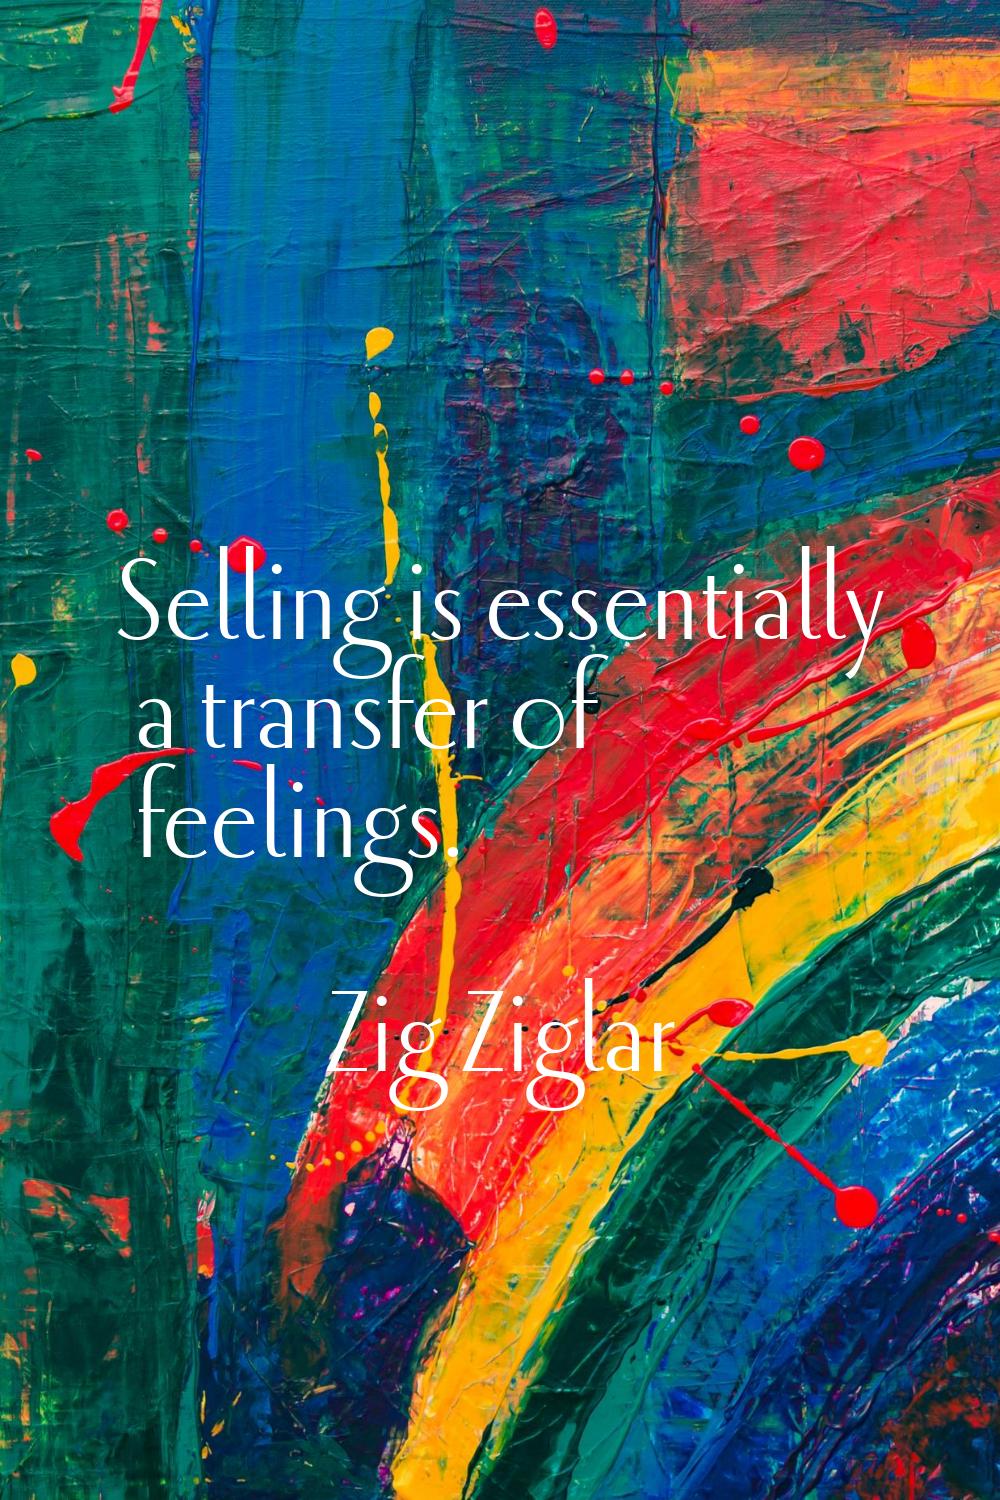 Selling is essentially a transfer of feelings.